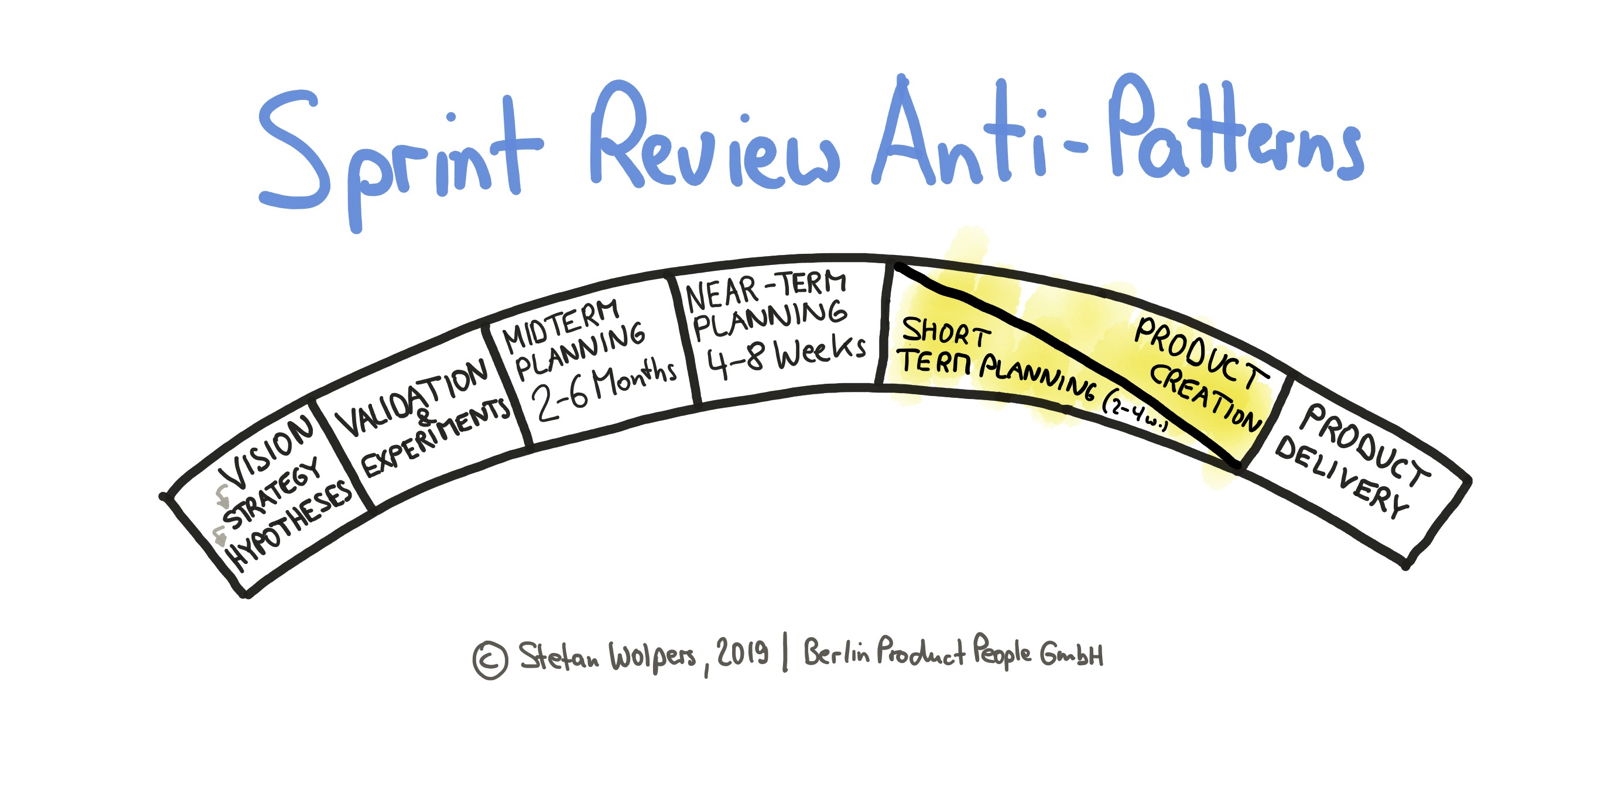 15 Sprint Review Anti-Patterns | DeviceDaily.com